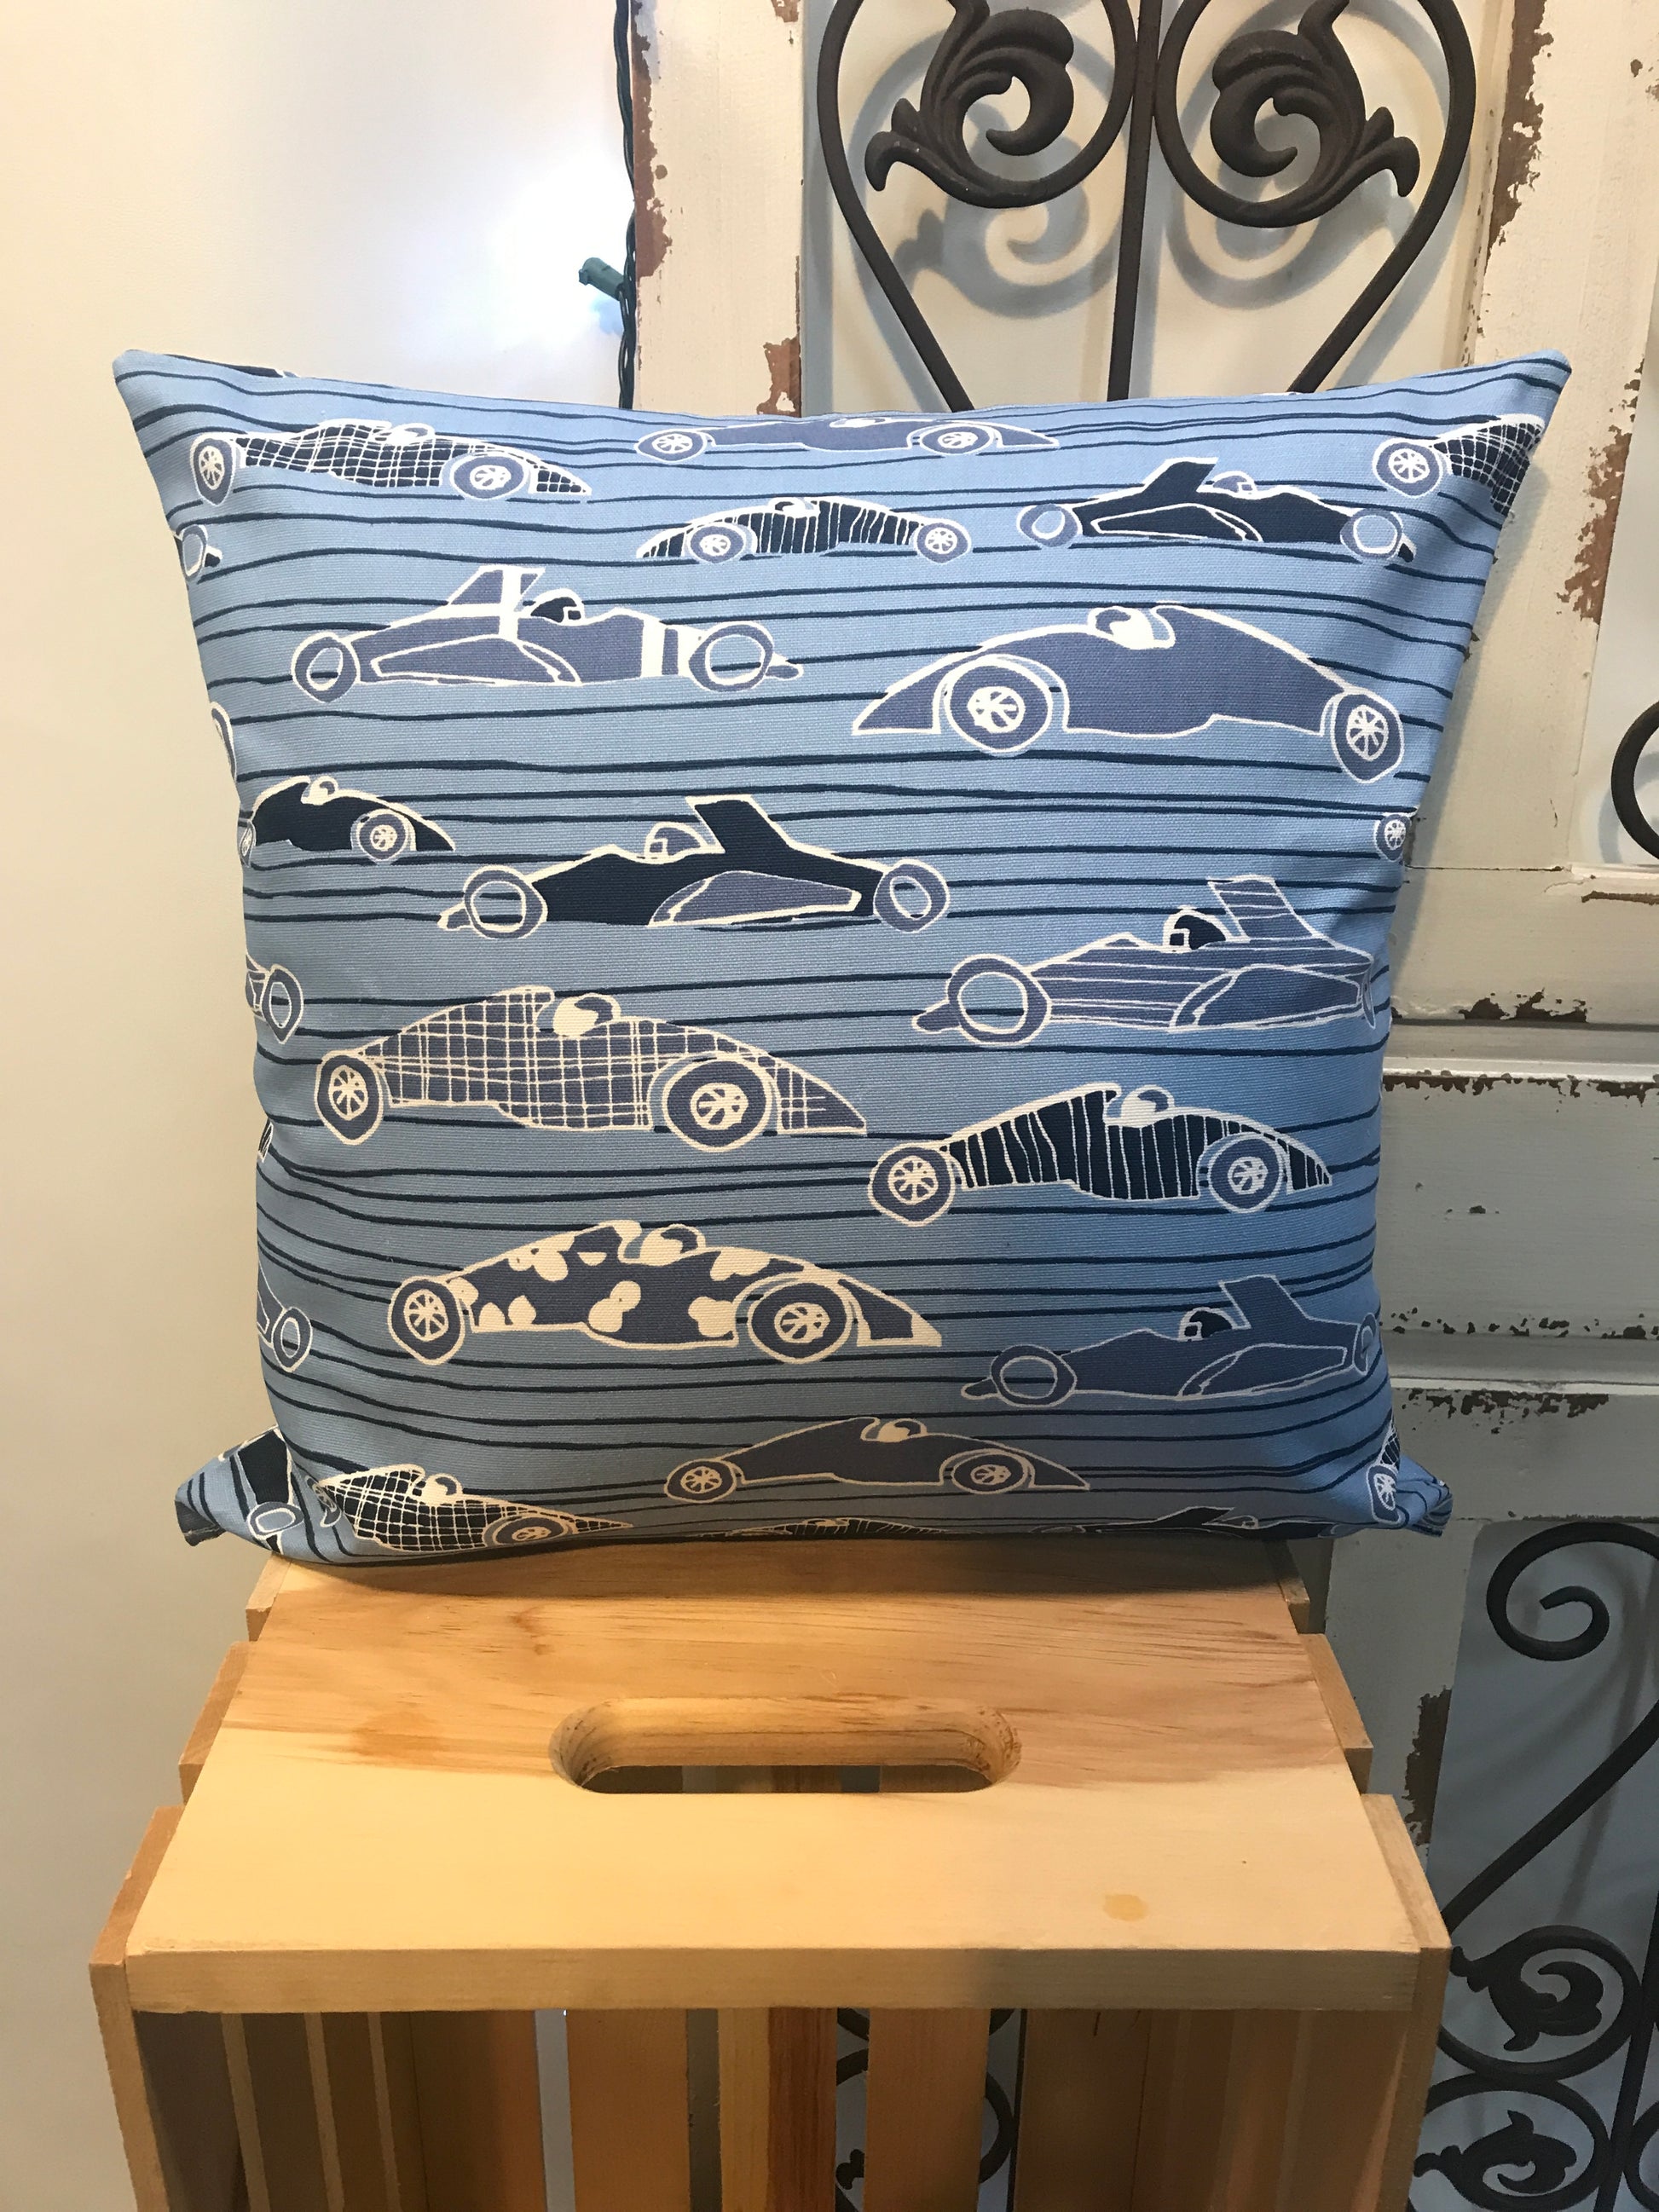 18" Race Cars Pillow Covers - InRugCo Studio & Gift Shop